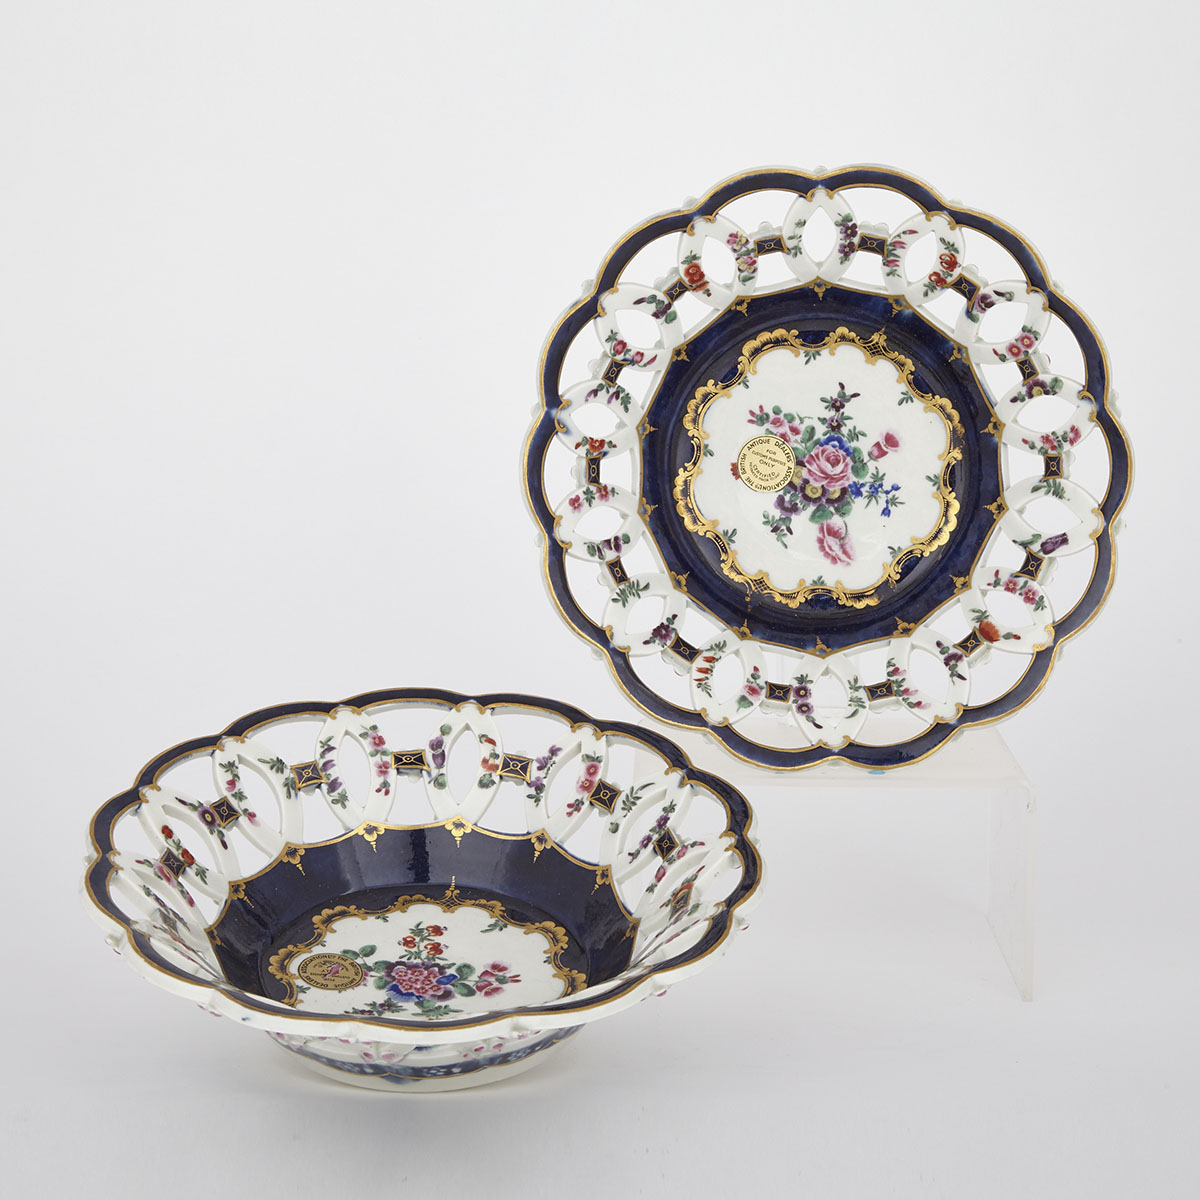 Pair of Worcester Blue Scale Ground Circular Baskets, c.1770